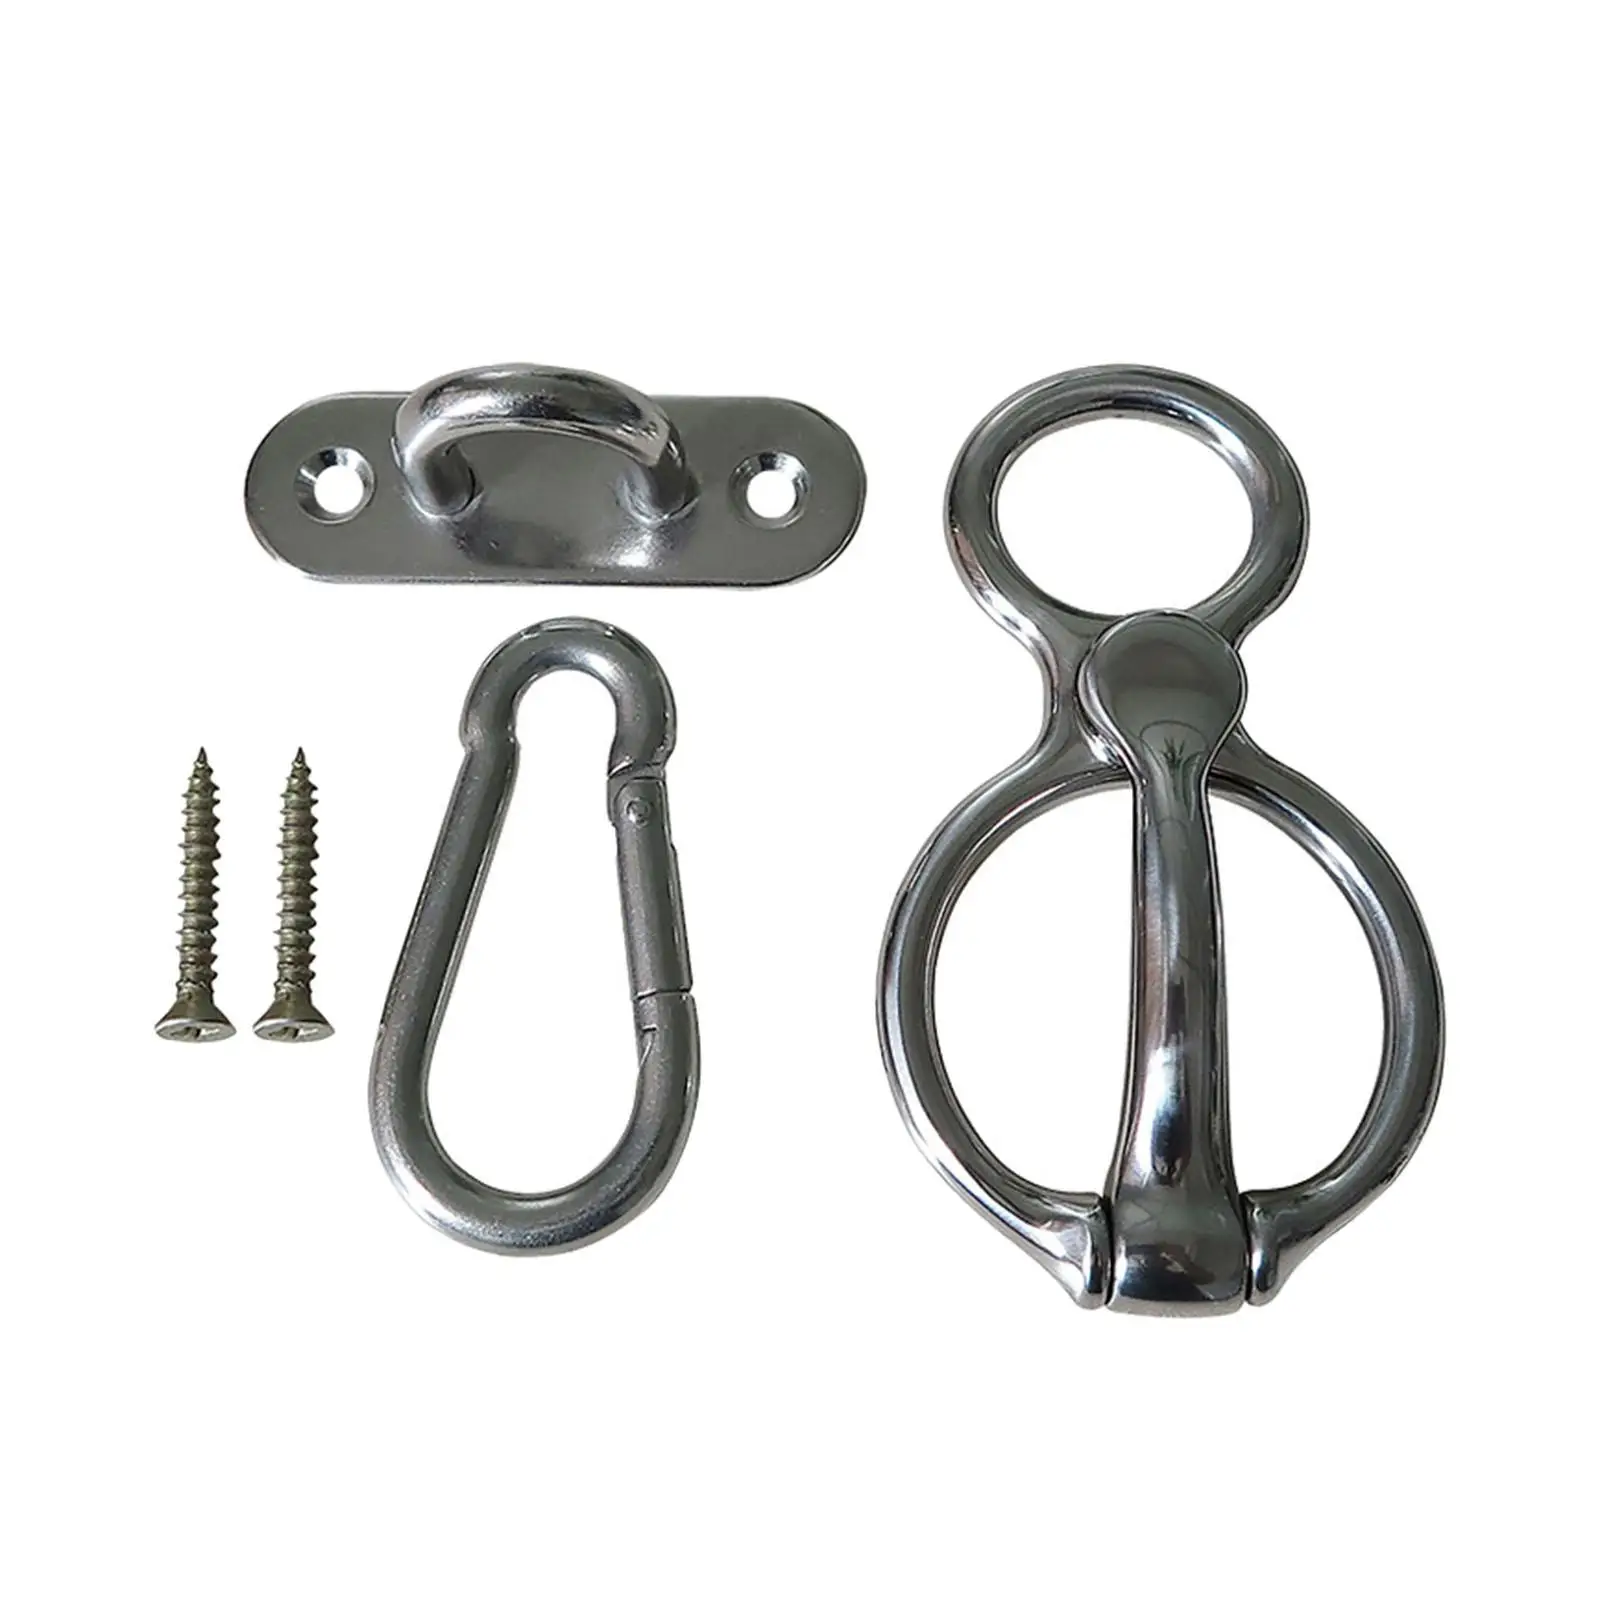 Horse Tie Ring Equestrian Hooks Outdoor Sports Prevent Horses from Pulling Back Fasteners with Eye Bolt Horse Tack Supplies